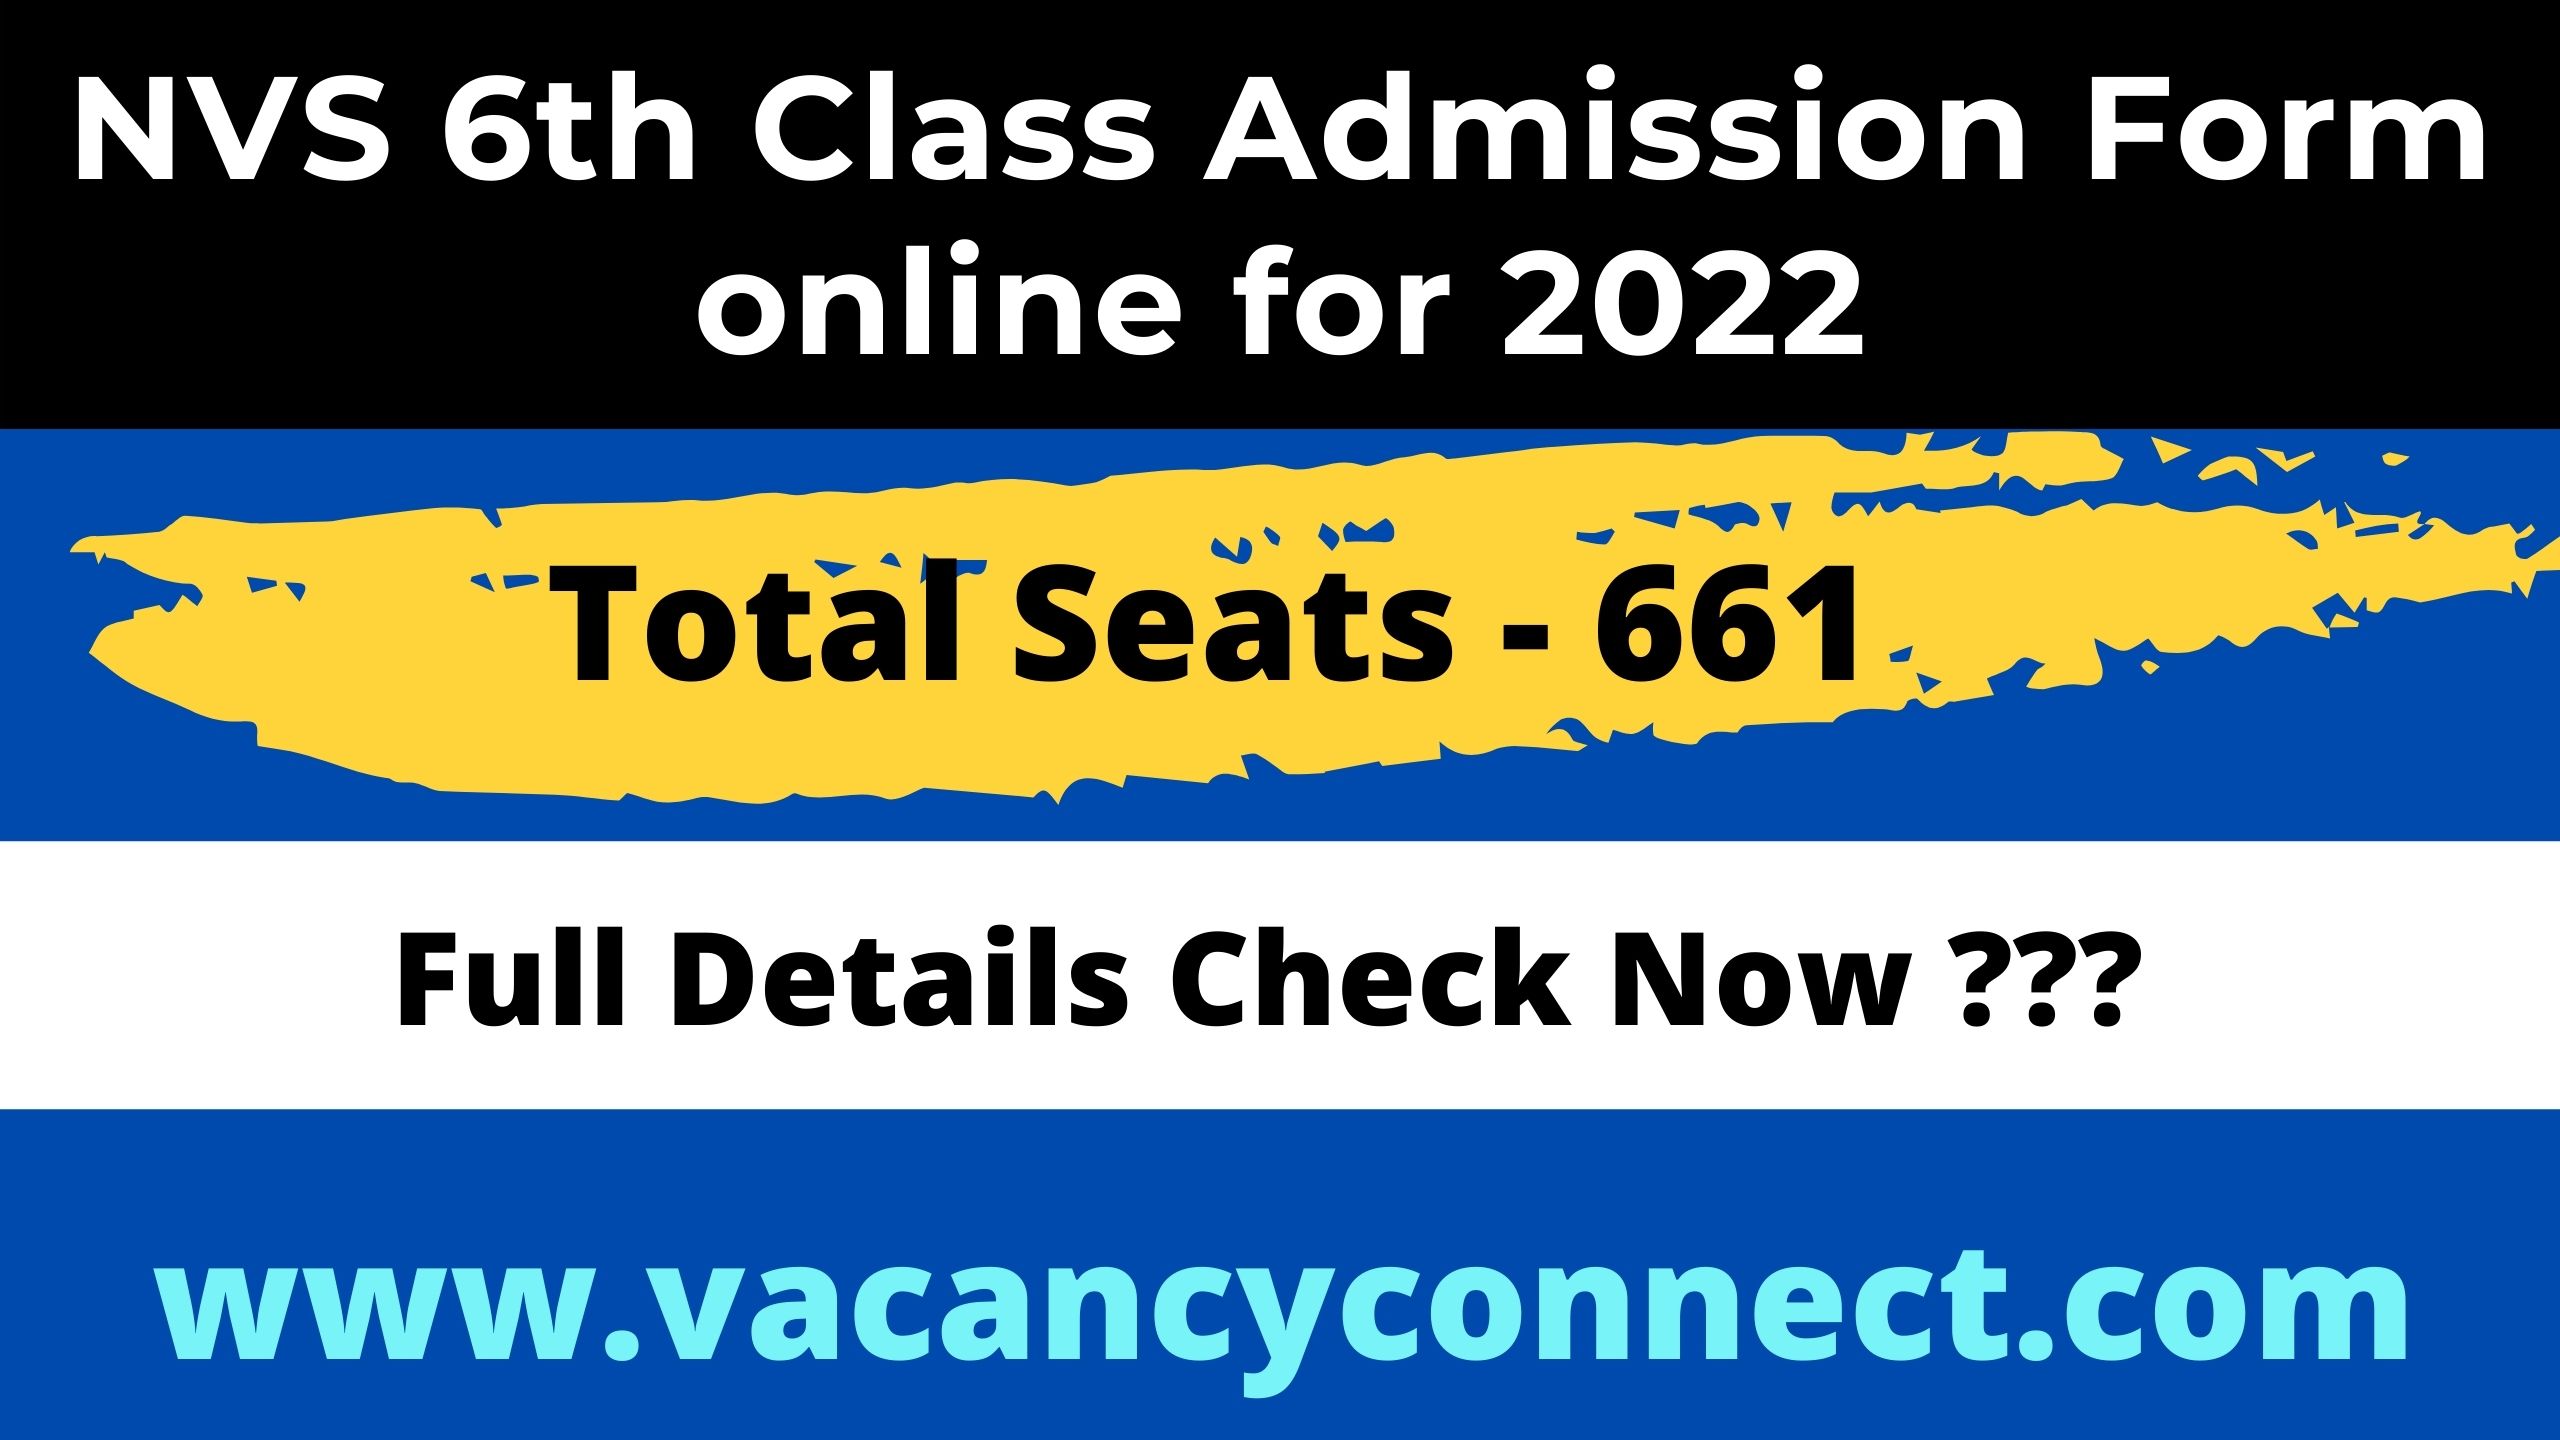 NVS 6th Class Admission Form online 2022